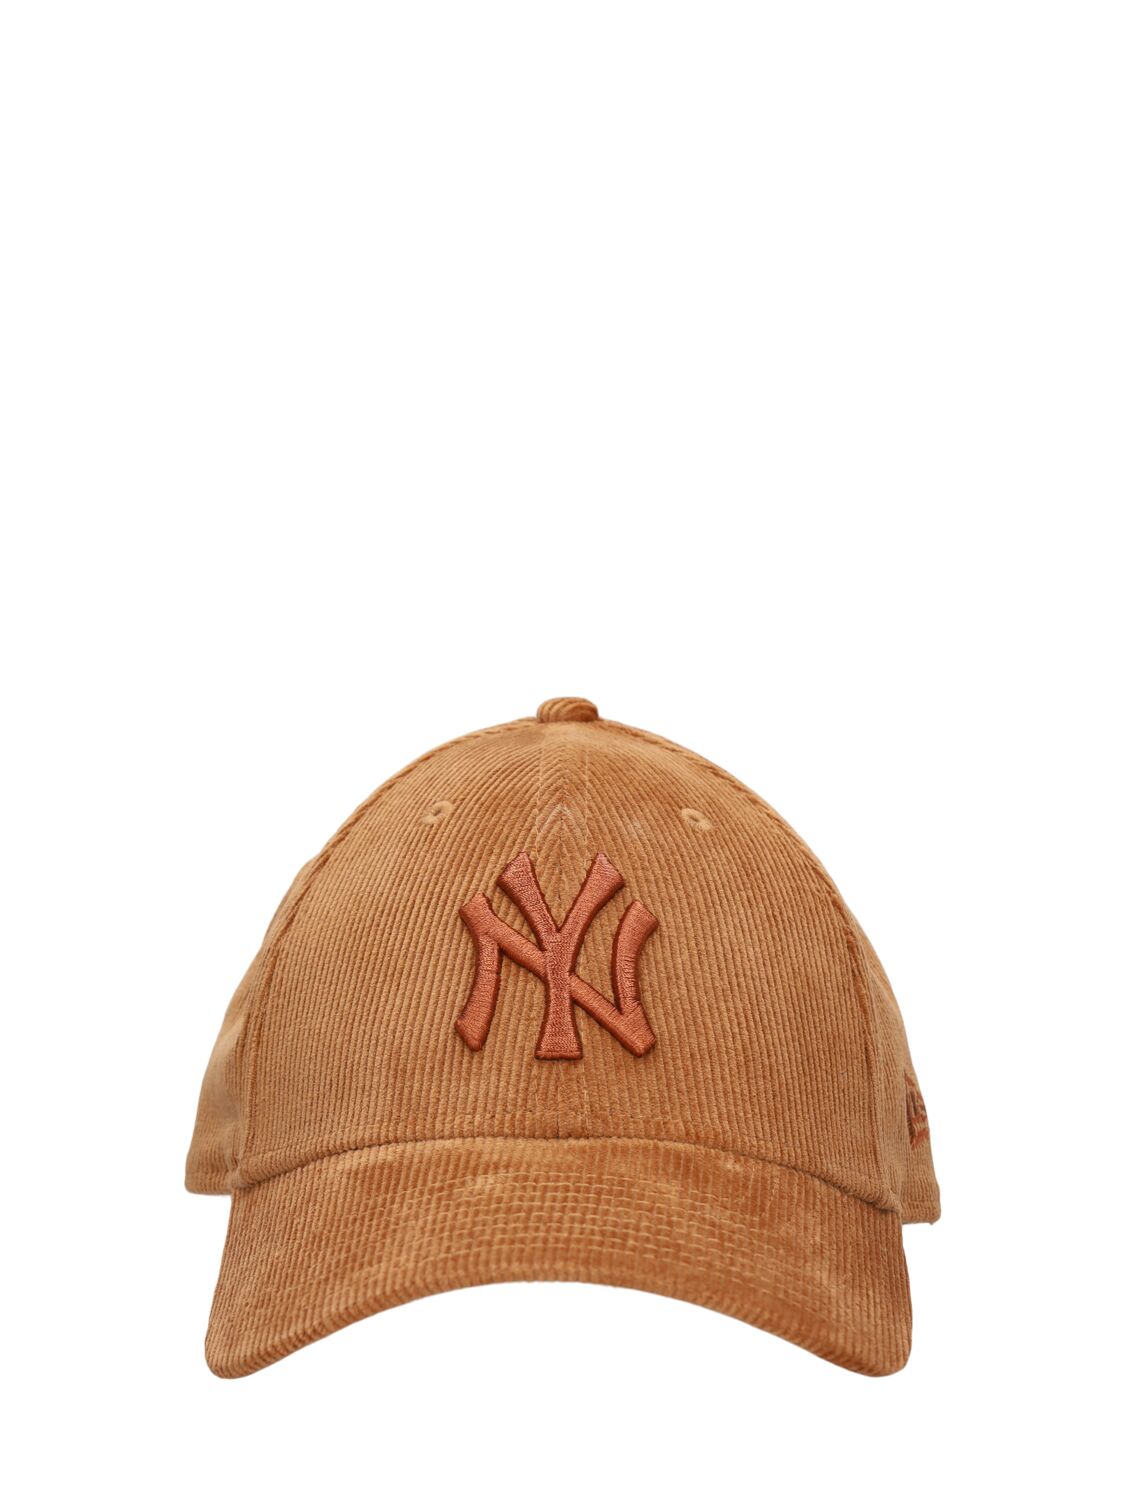 Image of Ny Yankees 9forty Corduroy Cap